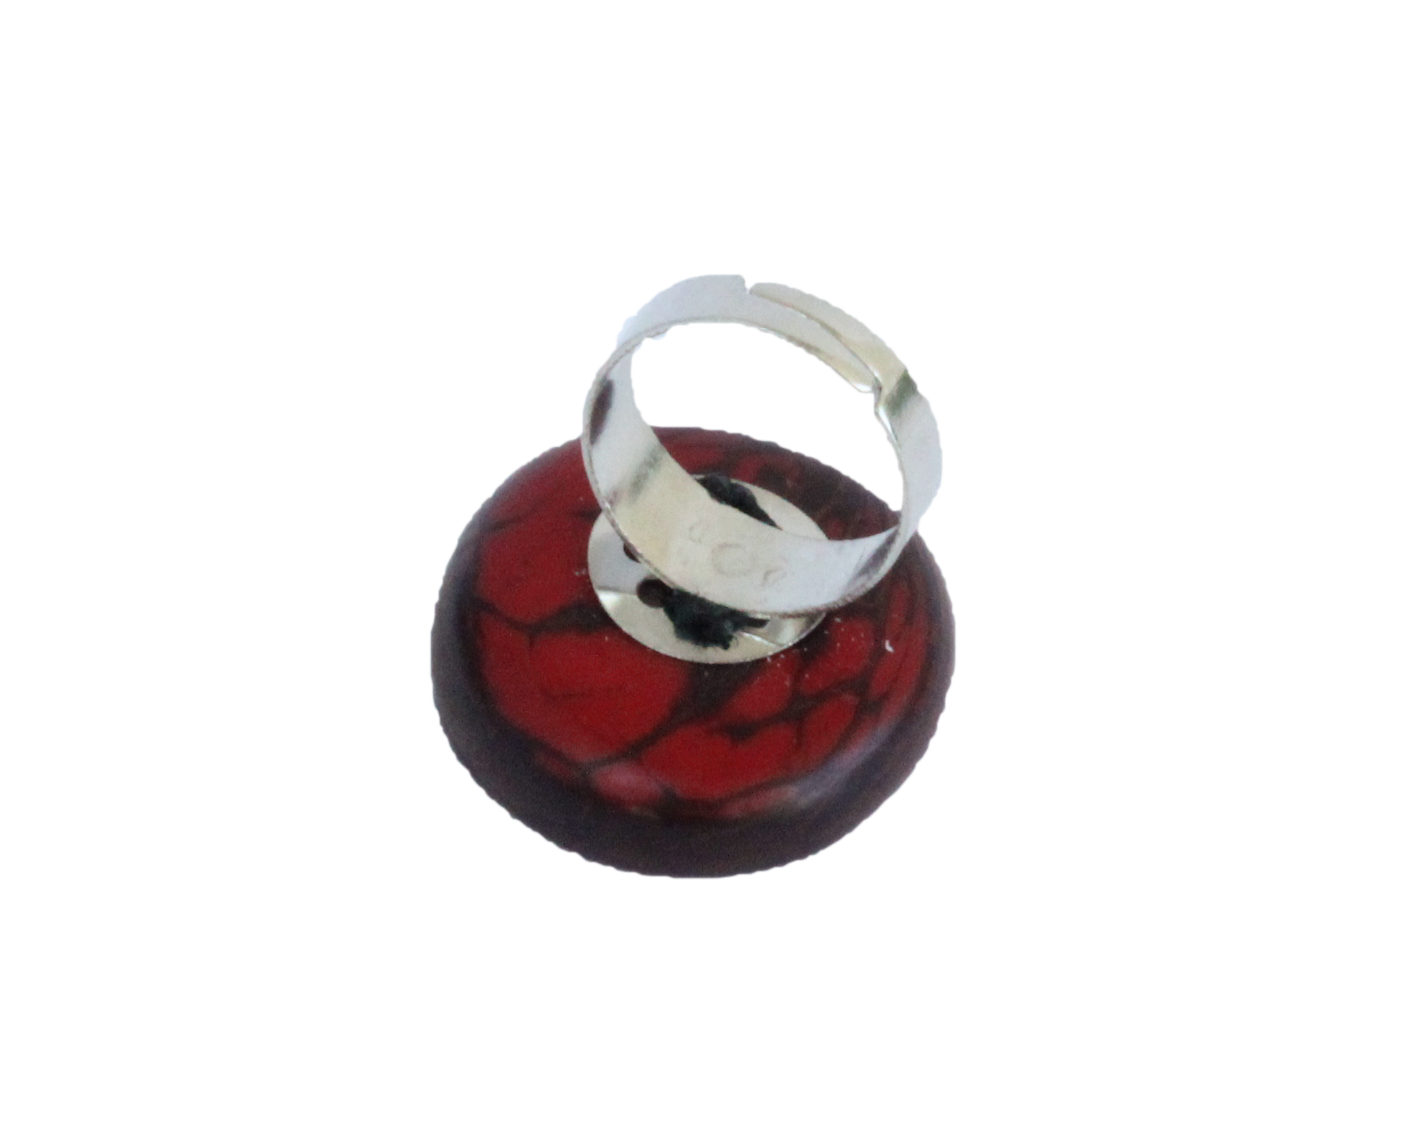 Handmade ring, tagua, red, adjustable ring size, sustainable, ethical, back